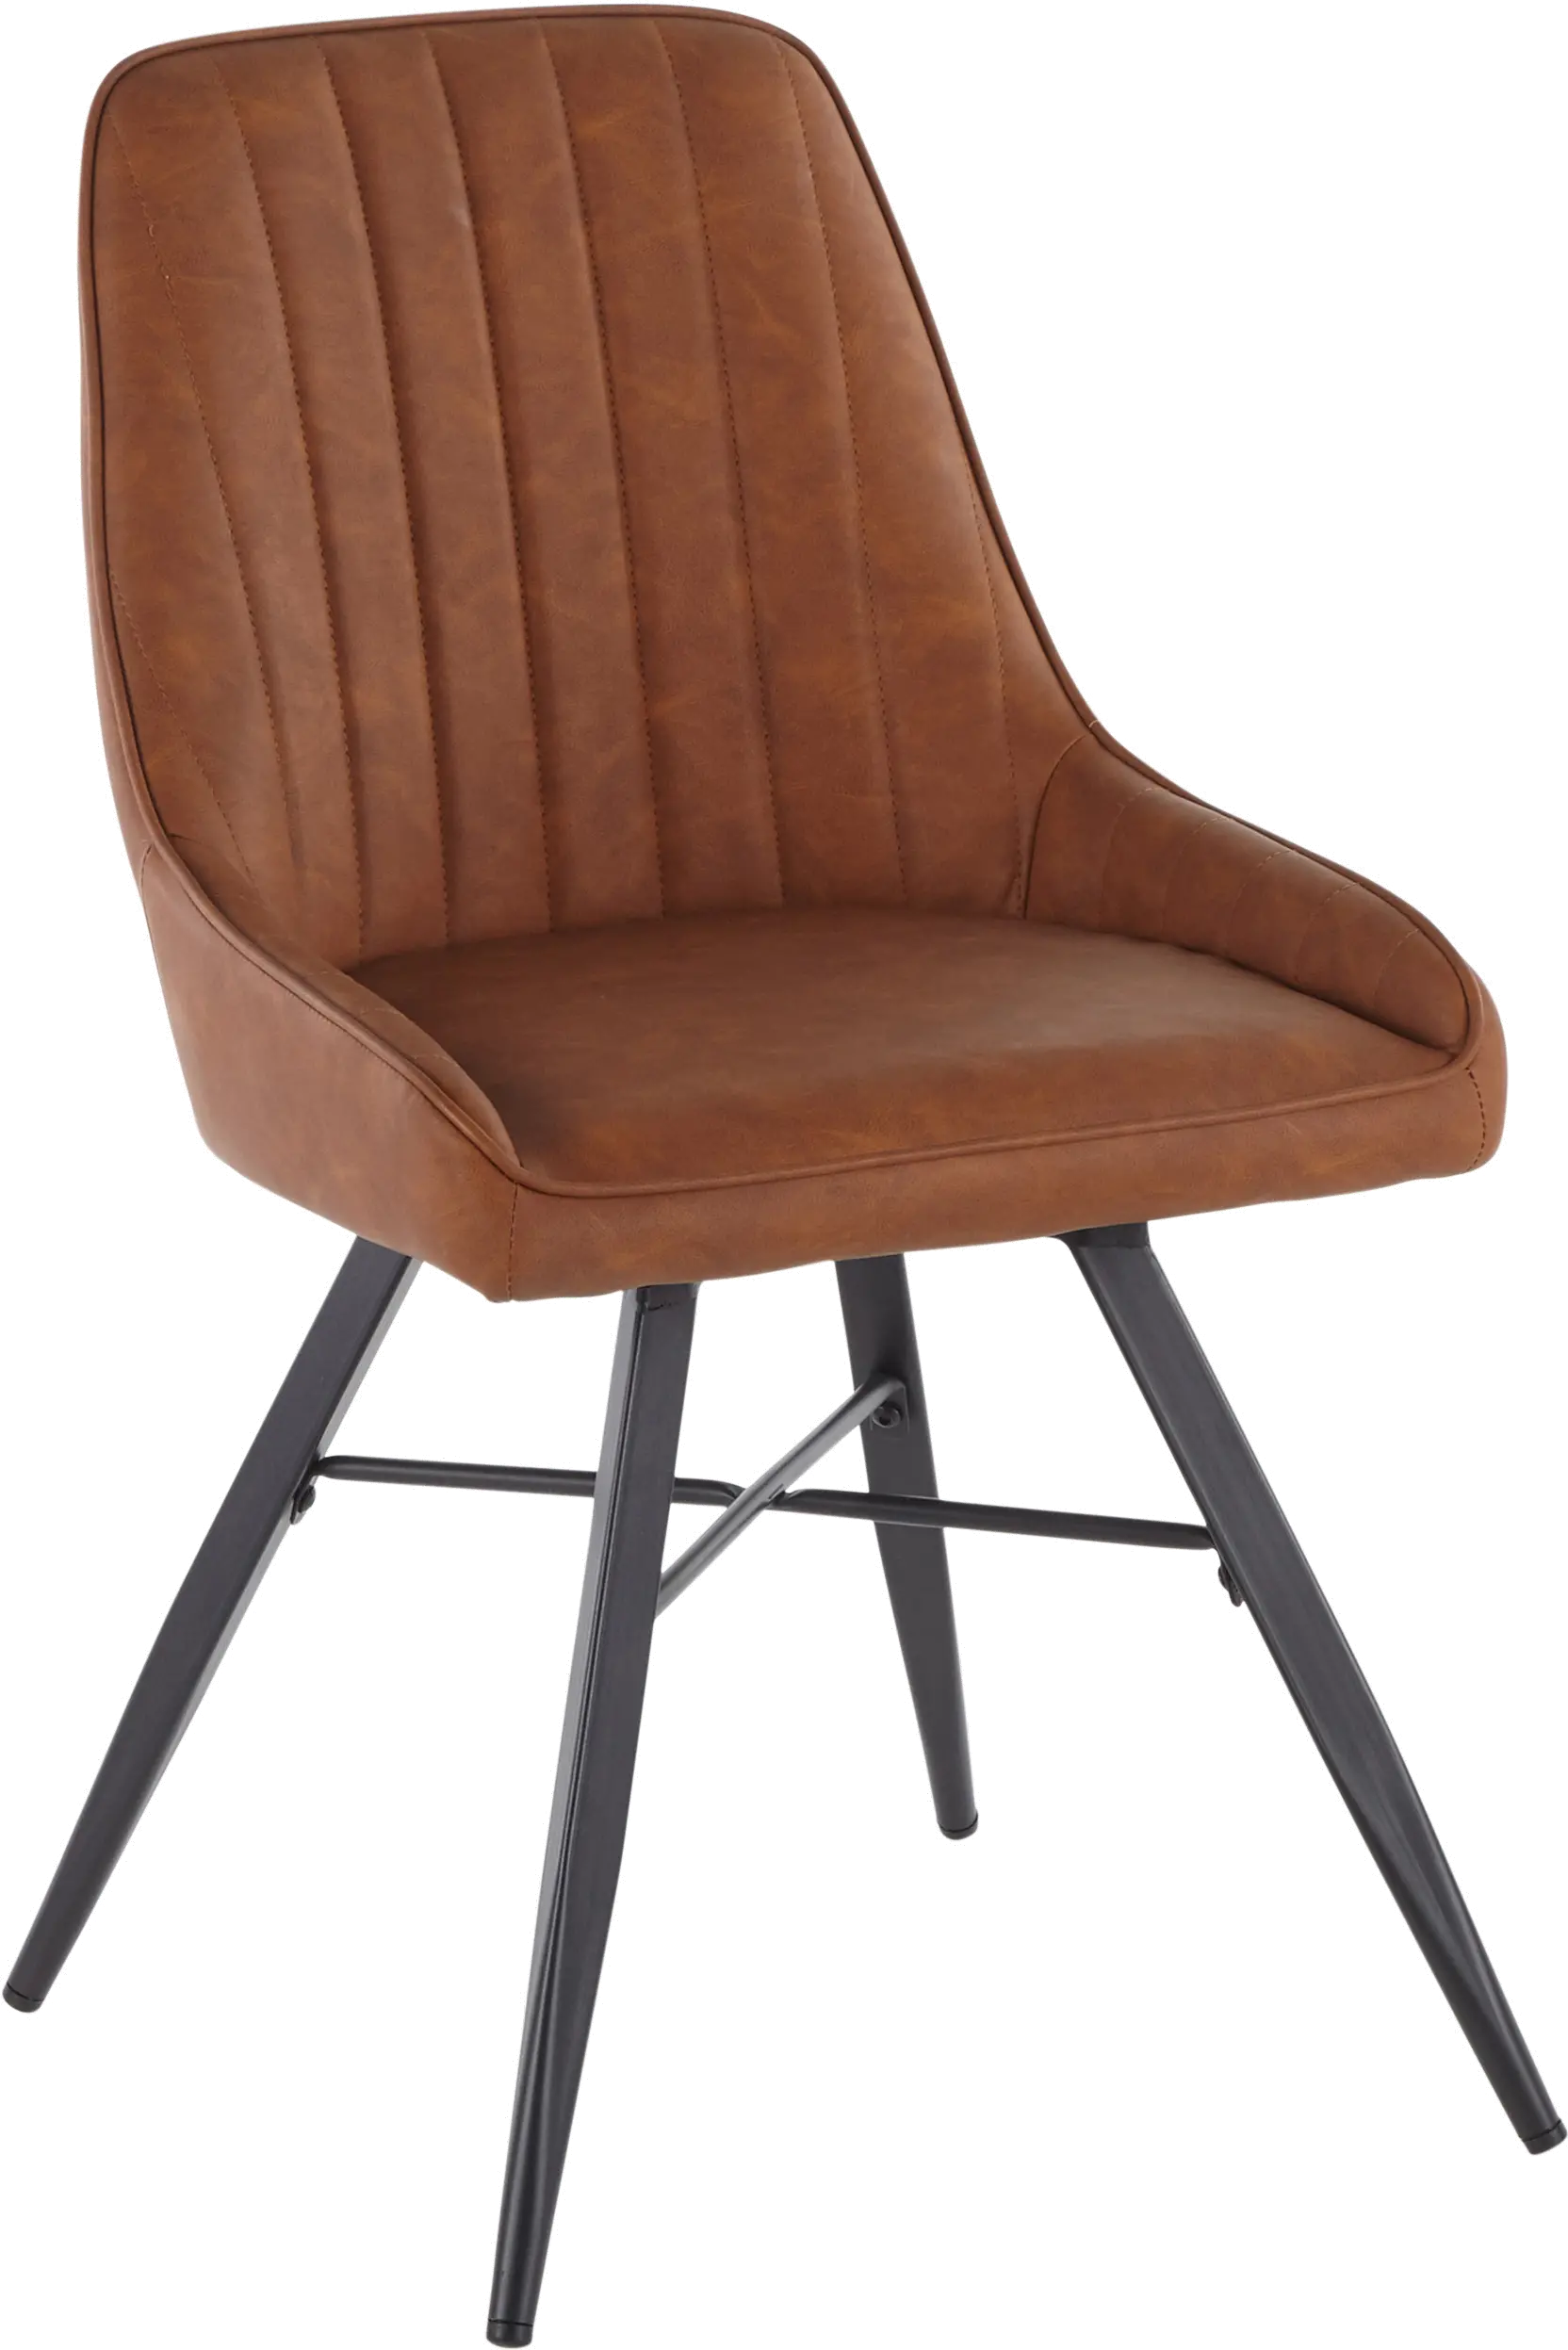 Cavalier Camel Faux Leather Swiveling Chair